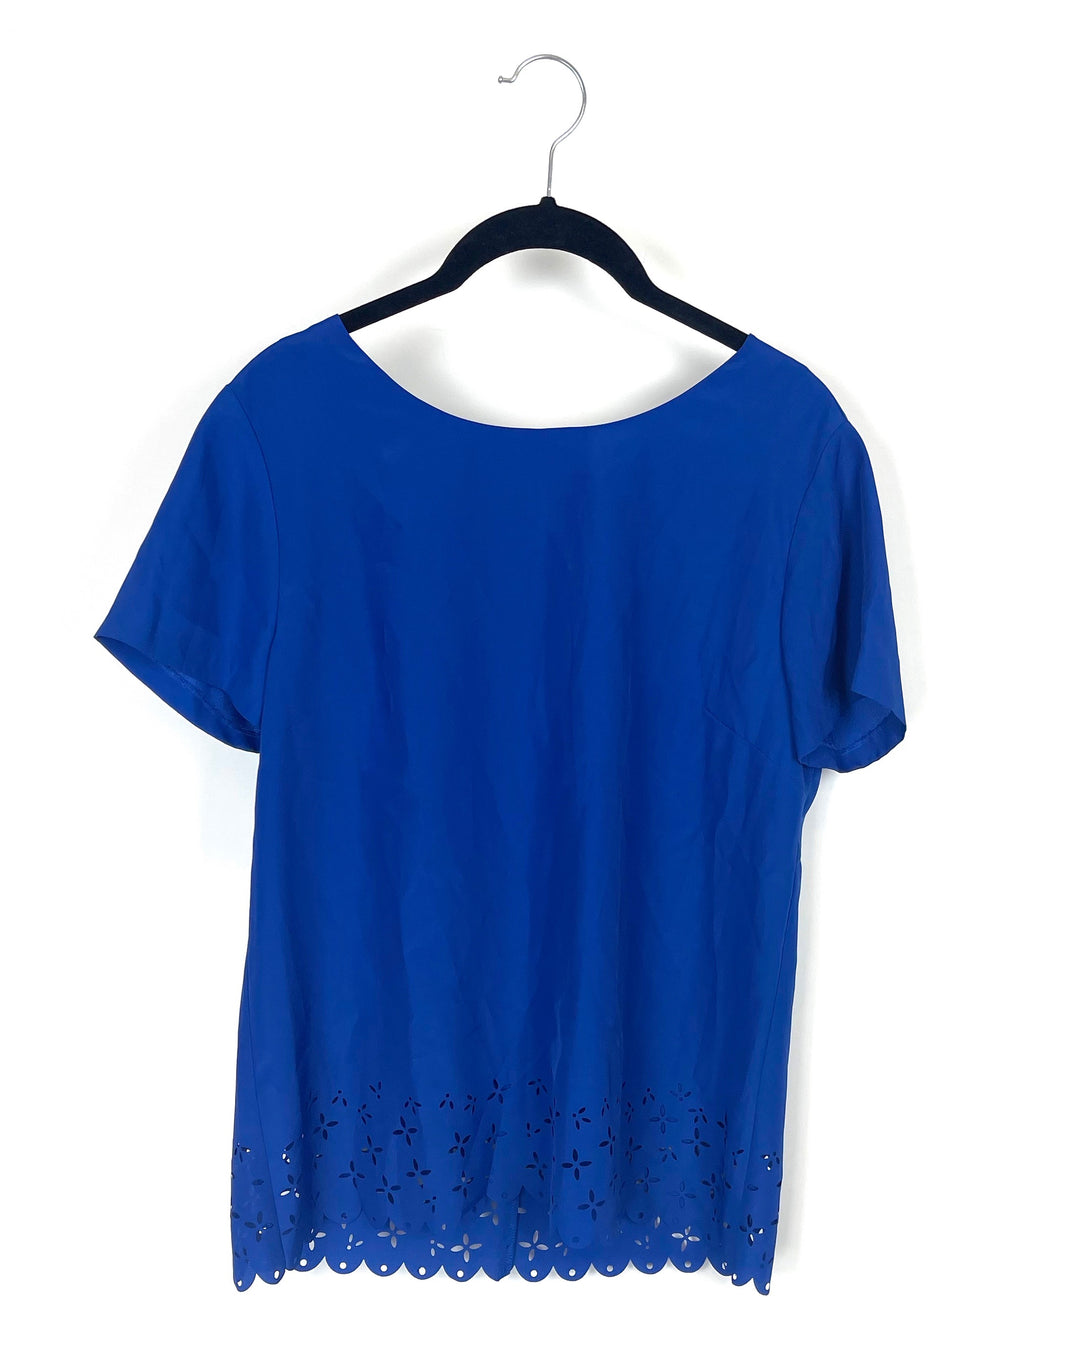 Royal Blue Blouse With Star Shaped Cutouts - Extra Small